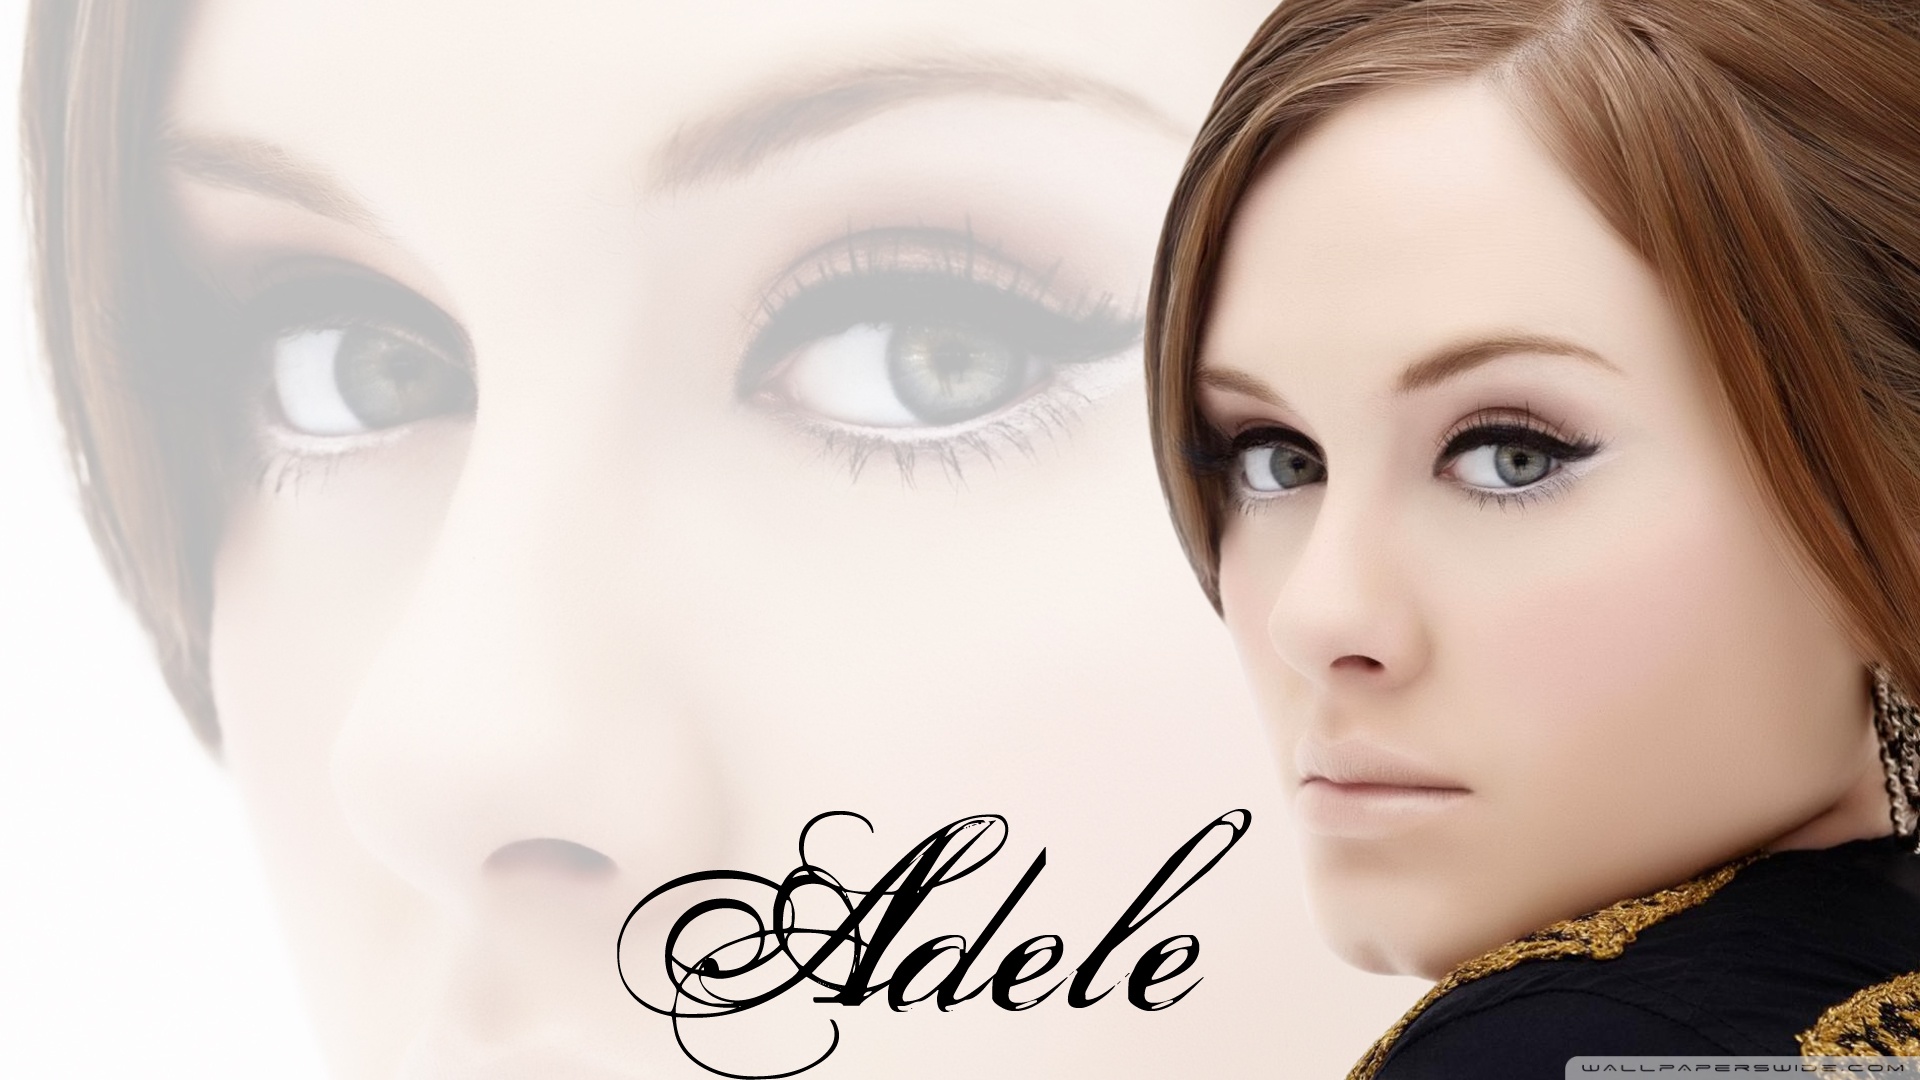 Adele Wallpaper for iPhone 12 Pro